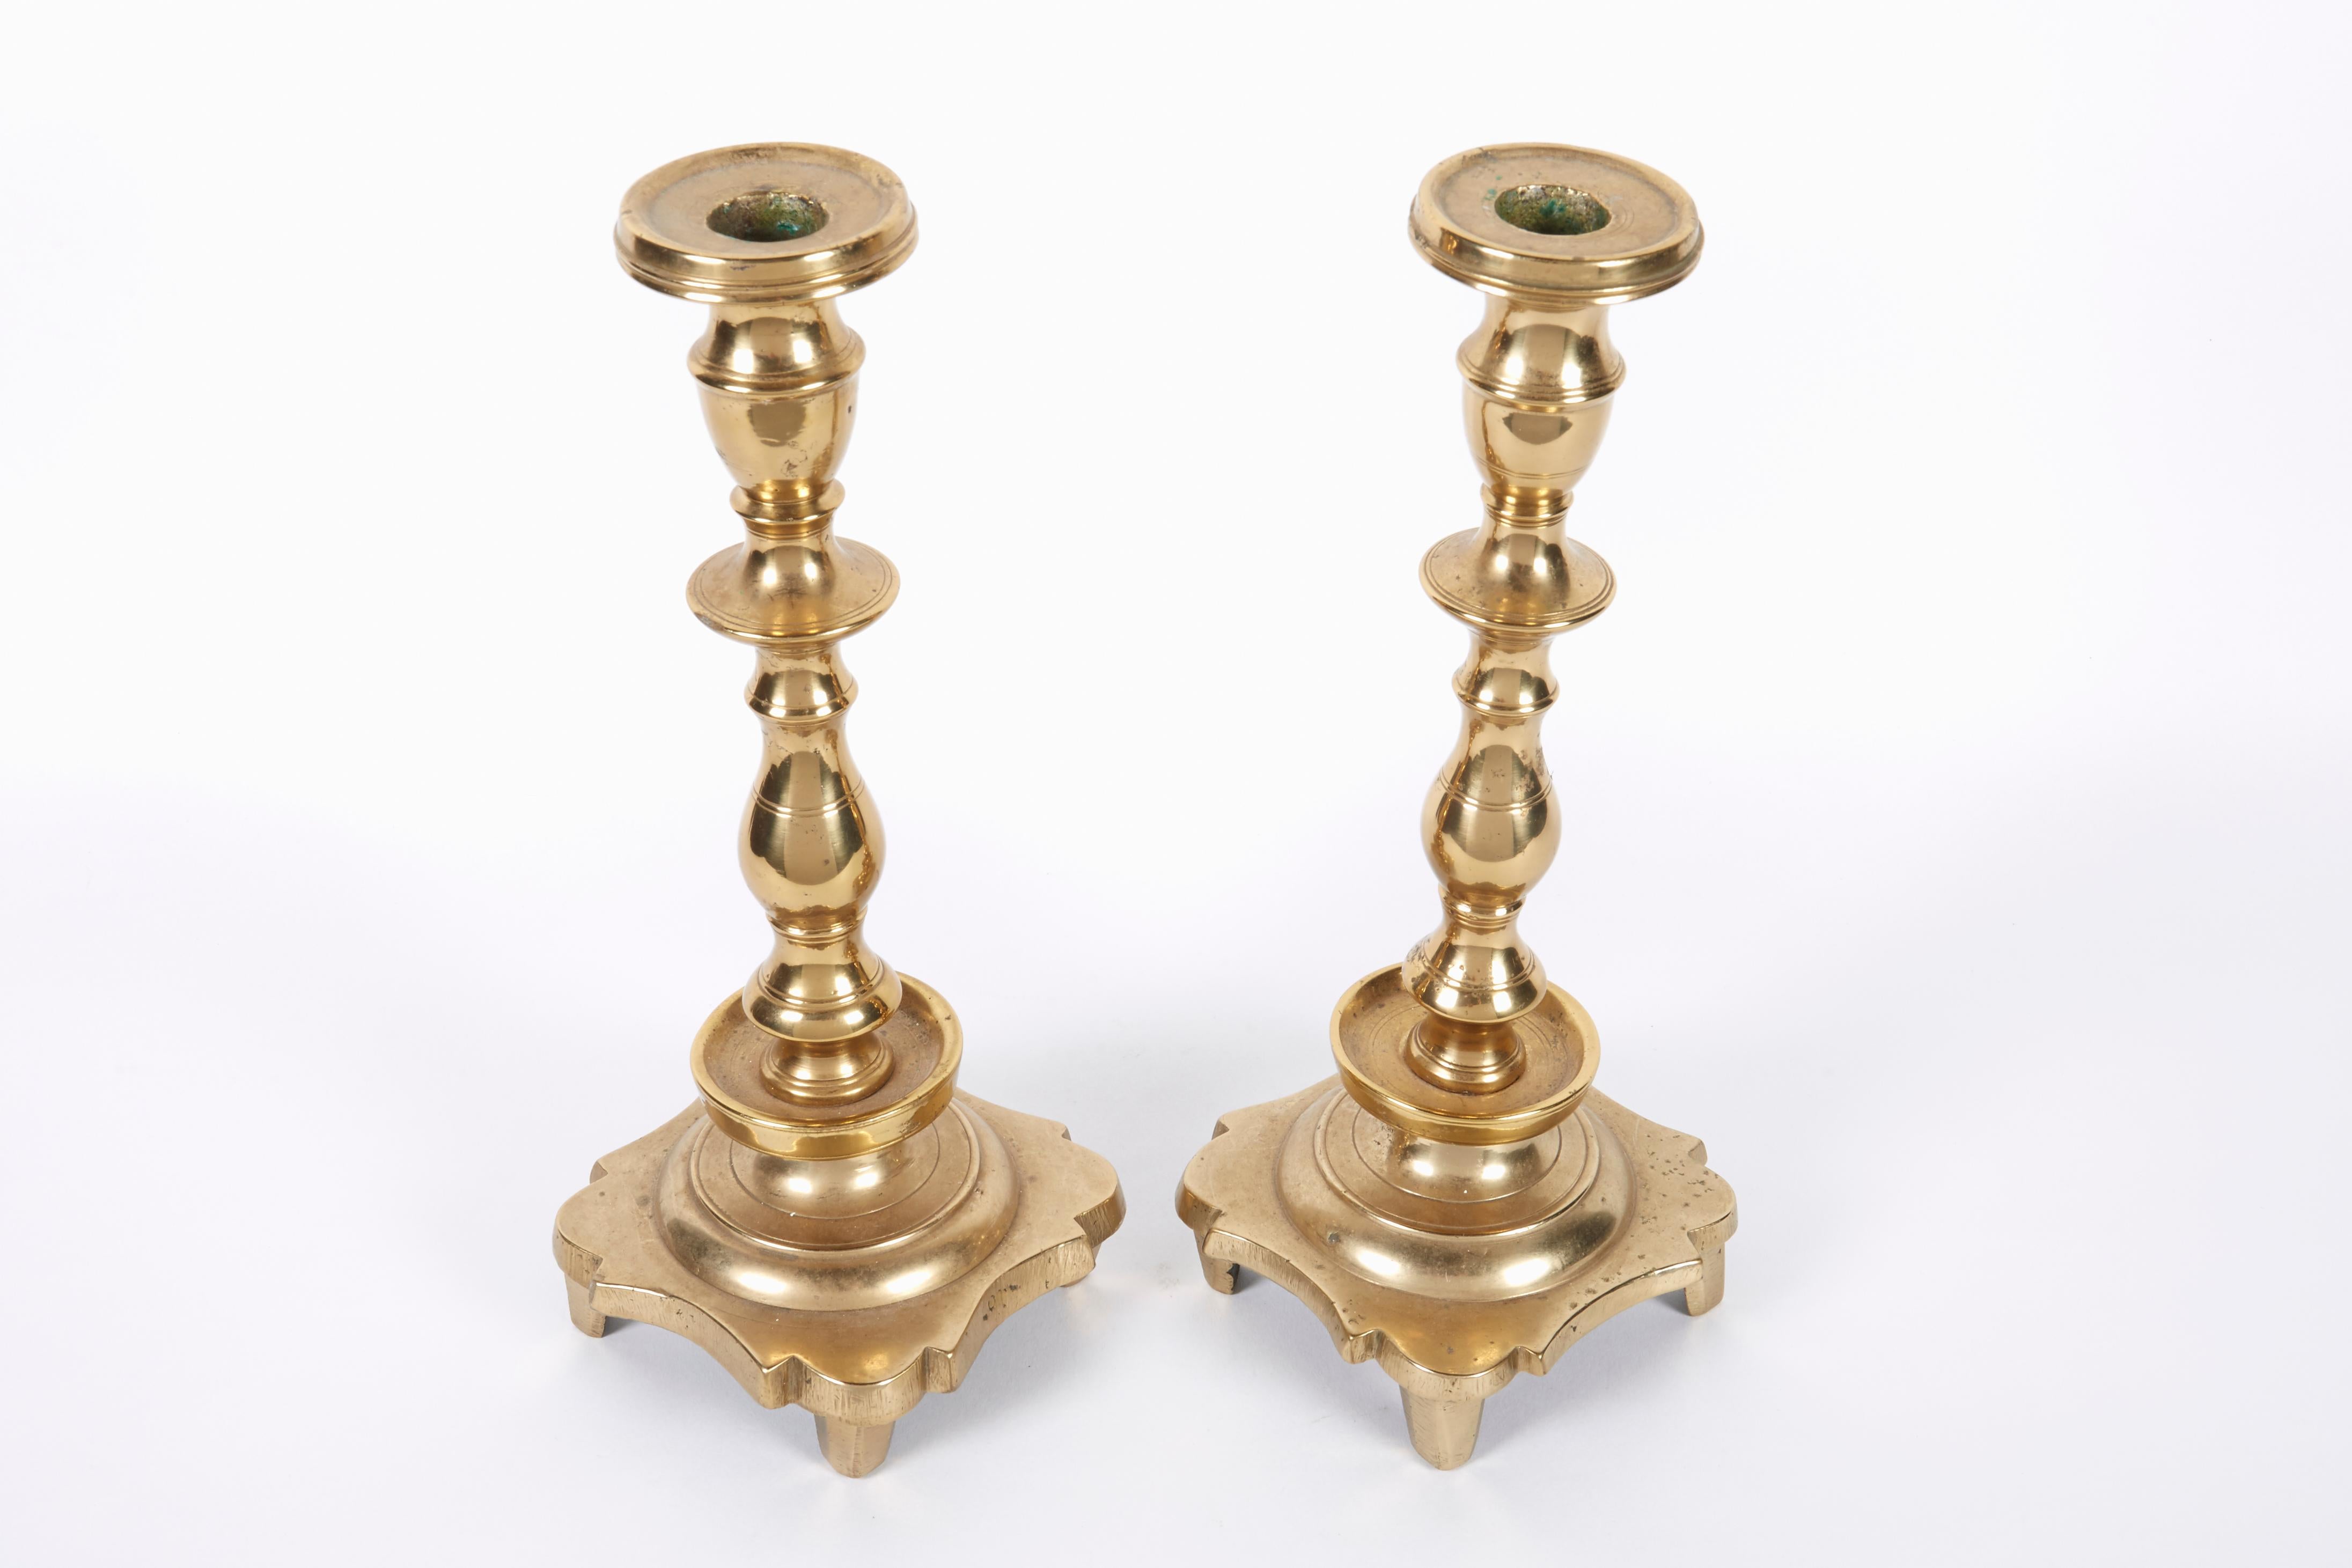 Late 18th century massive brass Sabbath candlesticks.
Footed base with trefoil motif and banding, with bladed knops and ample bobeche.
Hand turned screws for disassembly. For the Jews located in the large swath of territory known as the “Pale of the